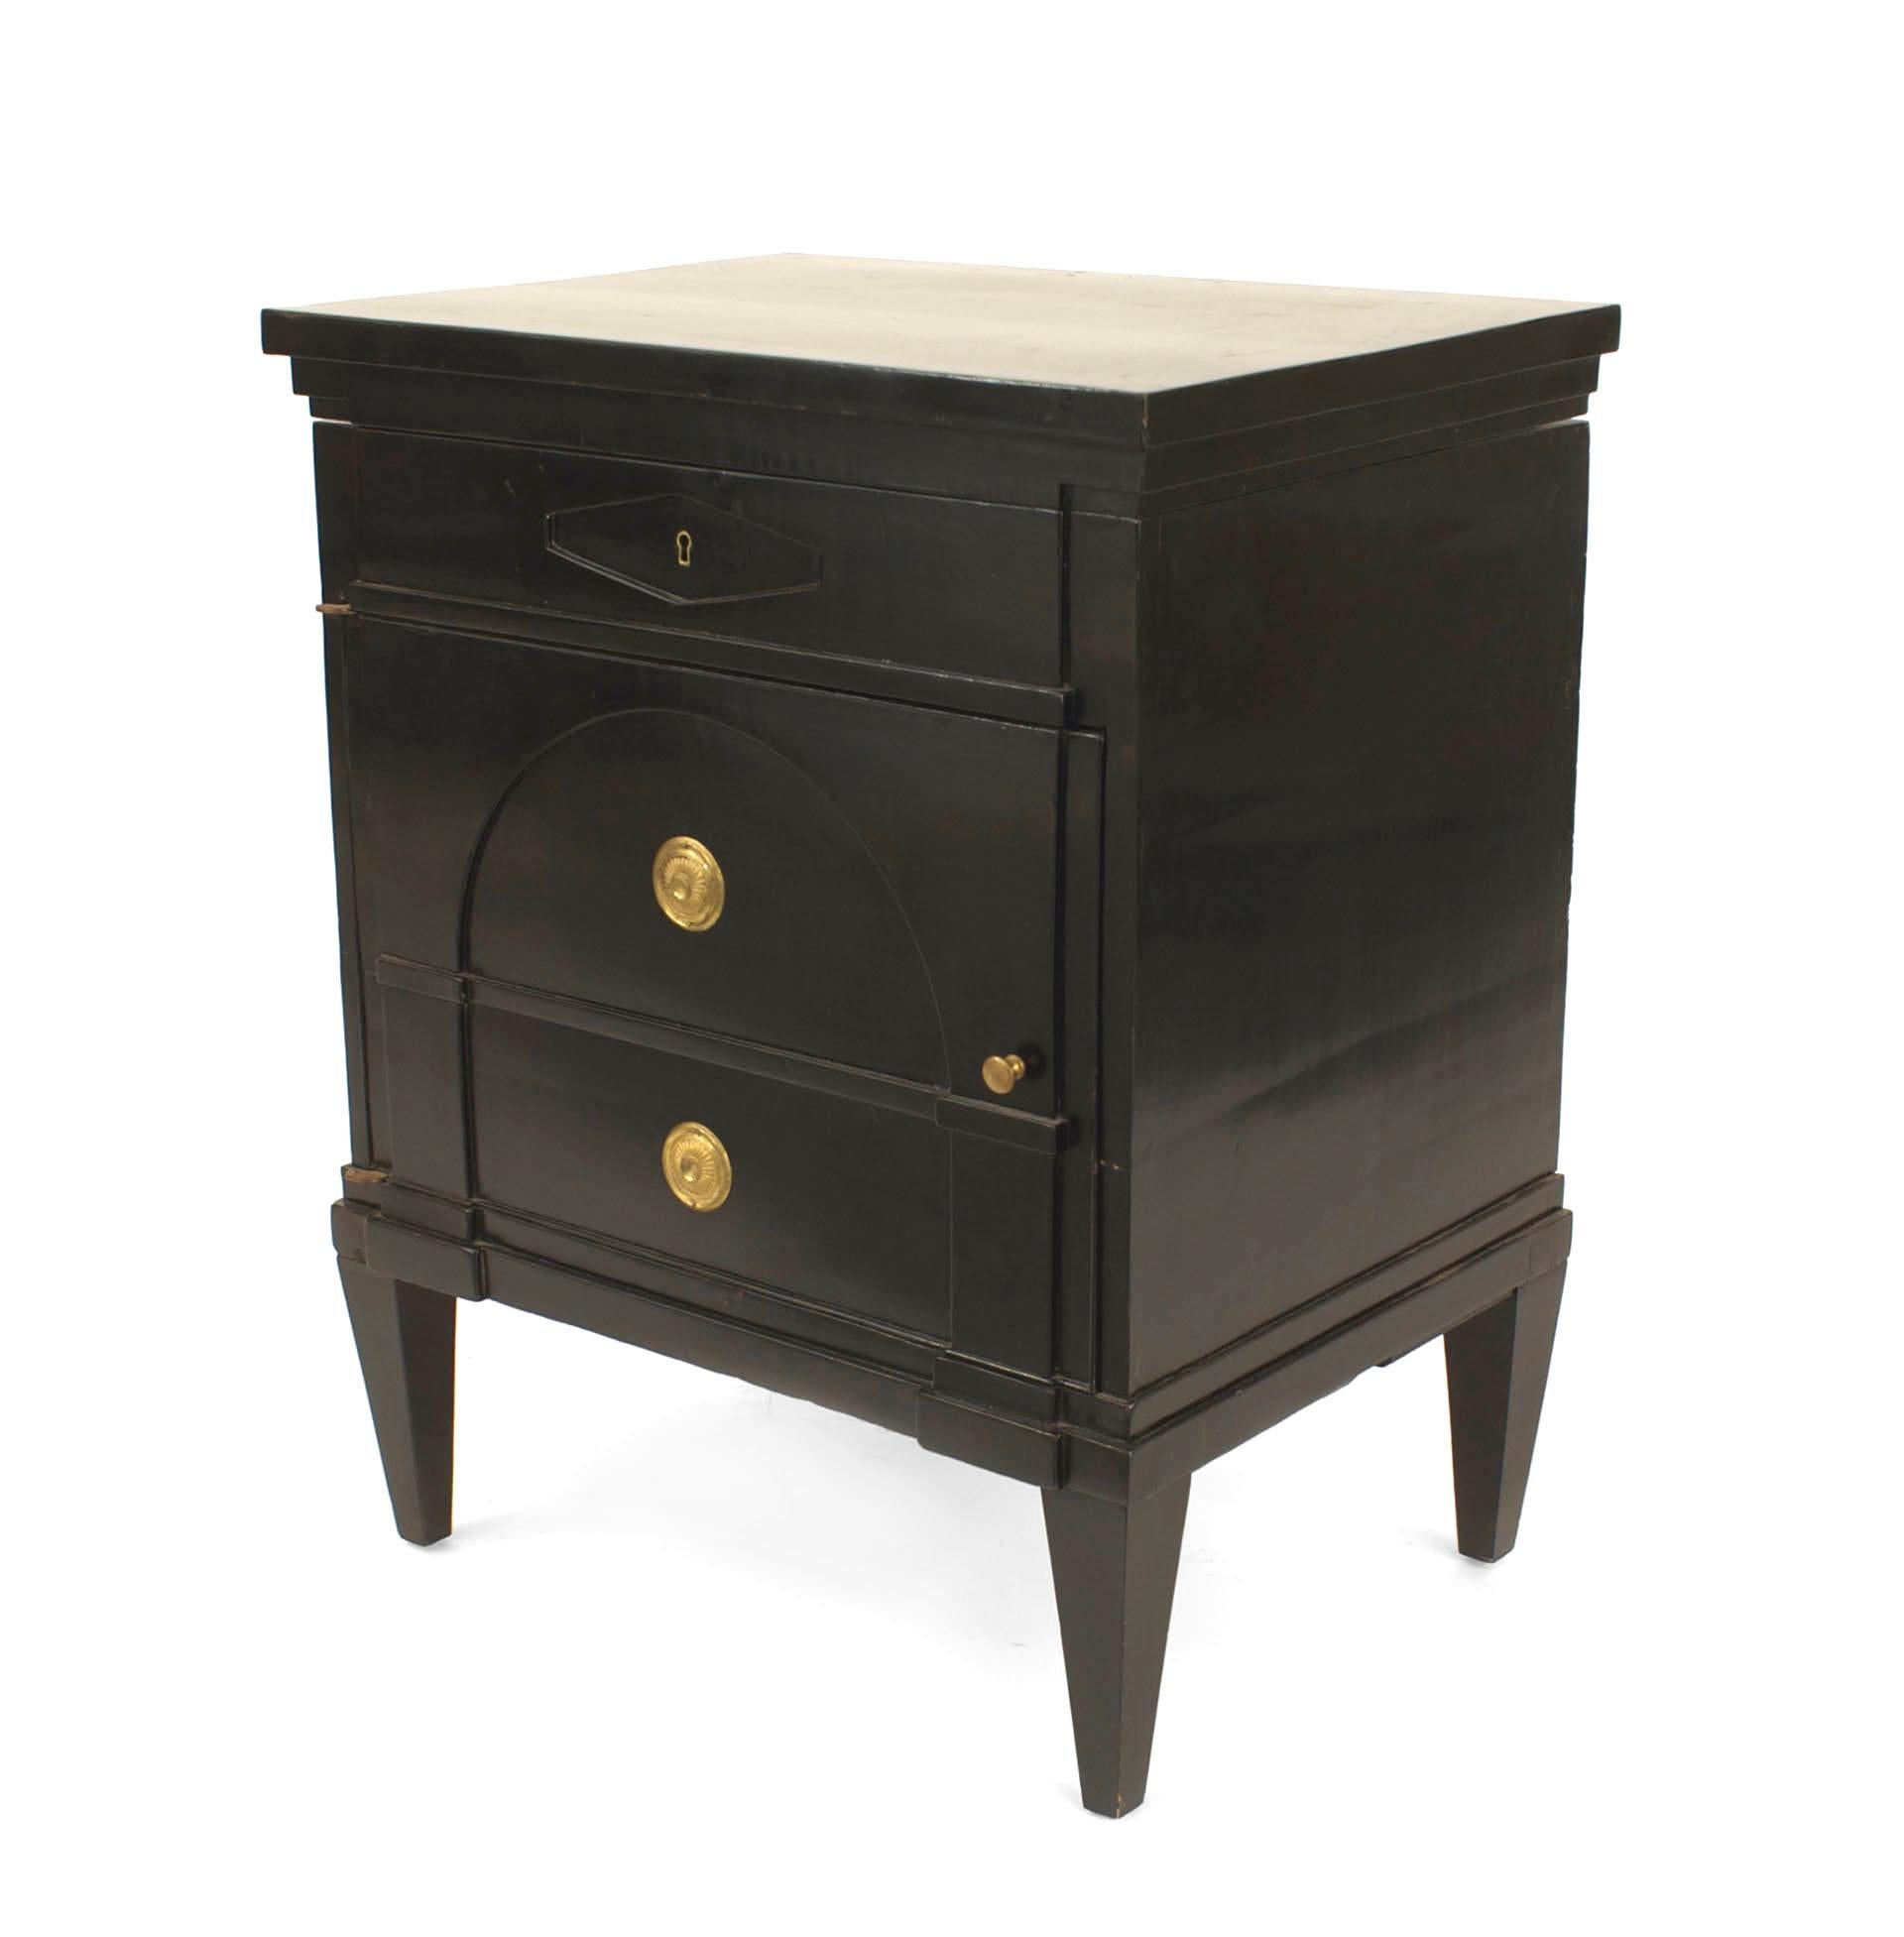 Austrian Biedermeier style (20th Century) ebonized commode with a bottom door revealing 2 shelves and a top faux drawer with a lift top.
